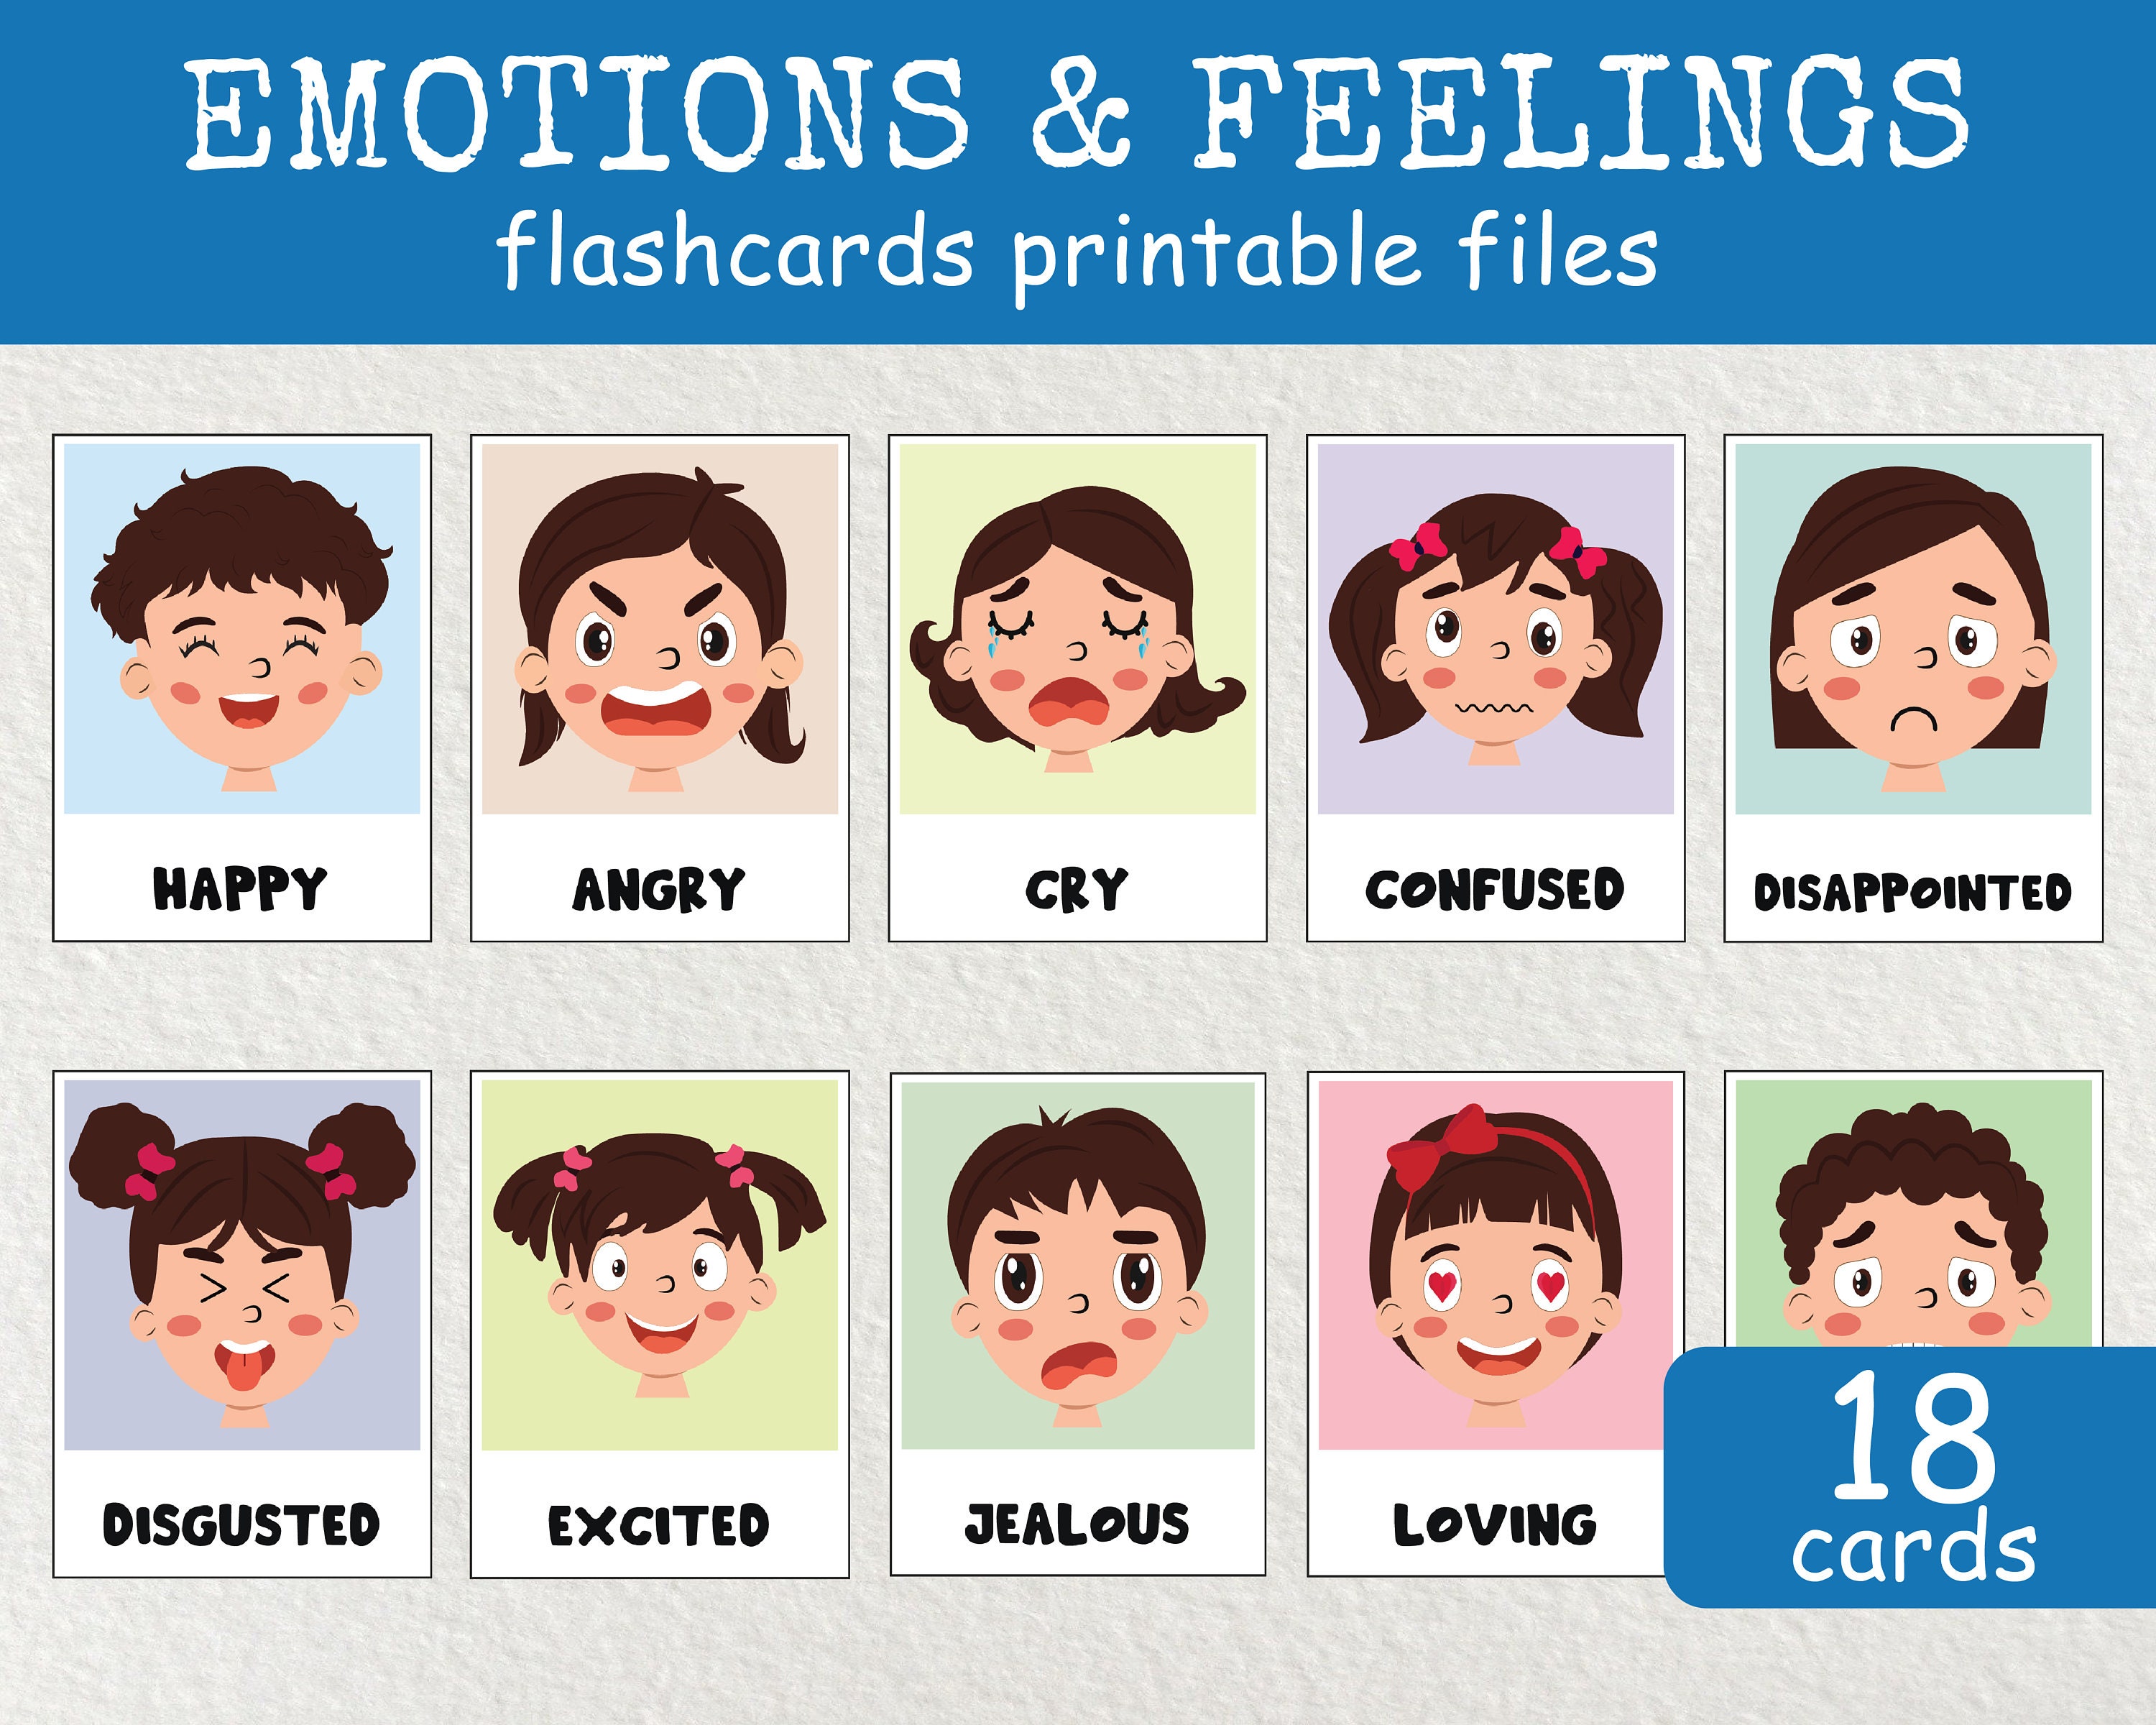 Feelings Faces Flashcards Emotion Flashcards Kids Emotions And